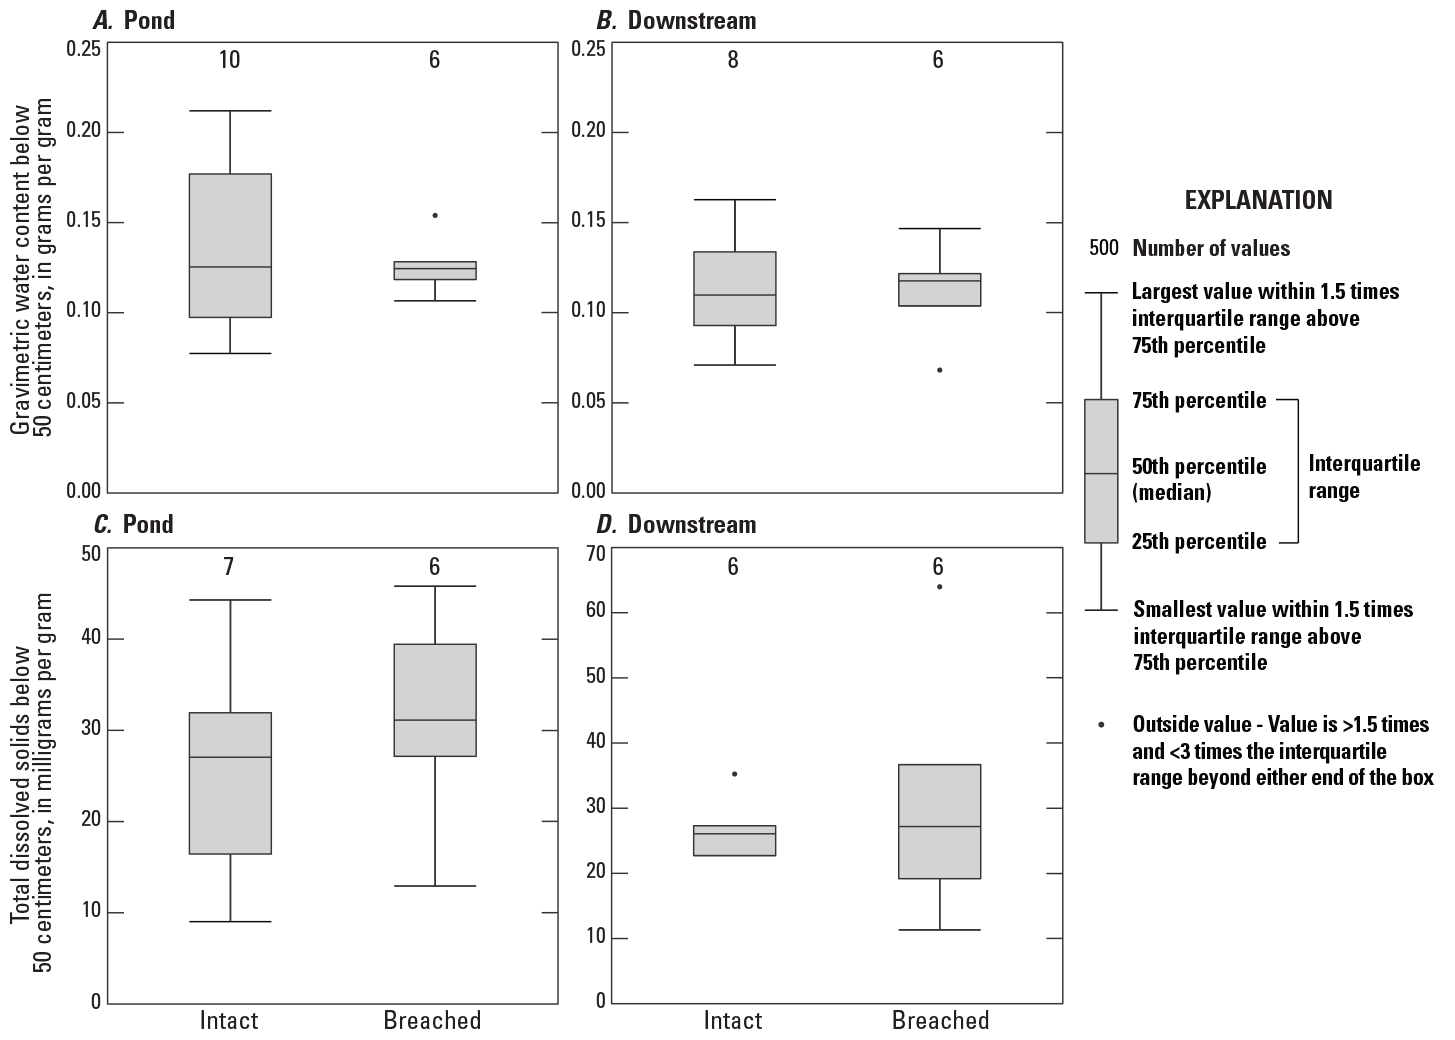 Figure 10.	Box plots showing that median water content is similar beneath ponds with
                     breached or intact check dams but total dissolved solids concentrations may be less
                     below ponds with intact check dams. At downstream locations, water content and dissolved
                     solids content are similar between breached and intact check dams.